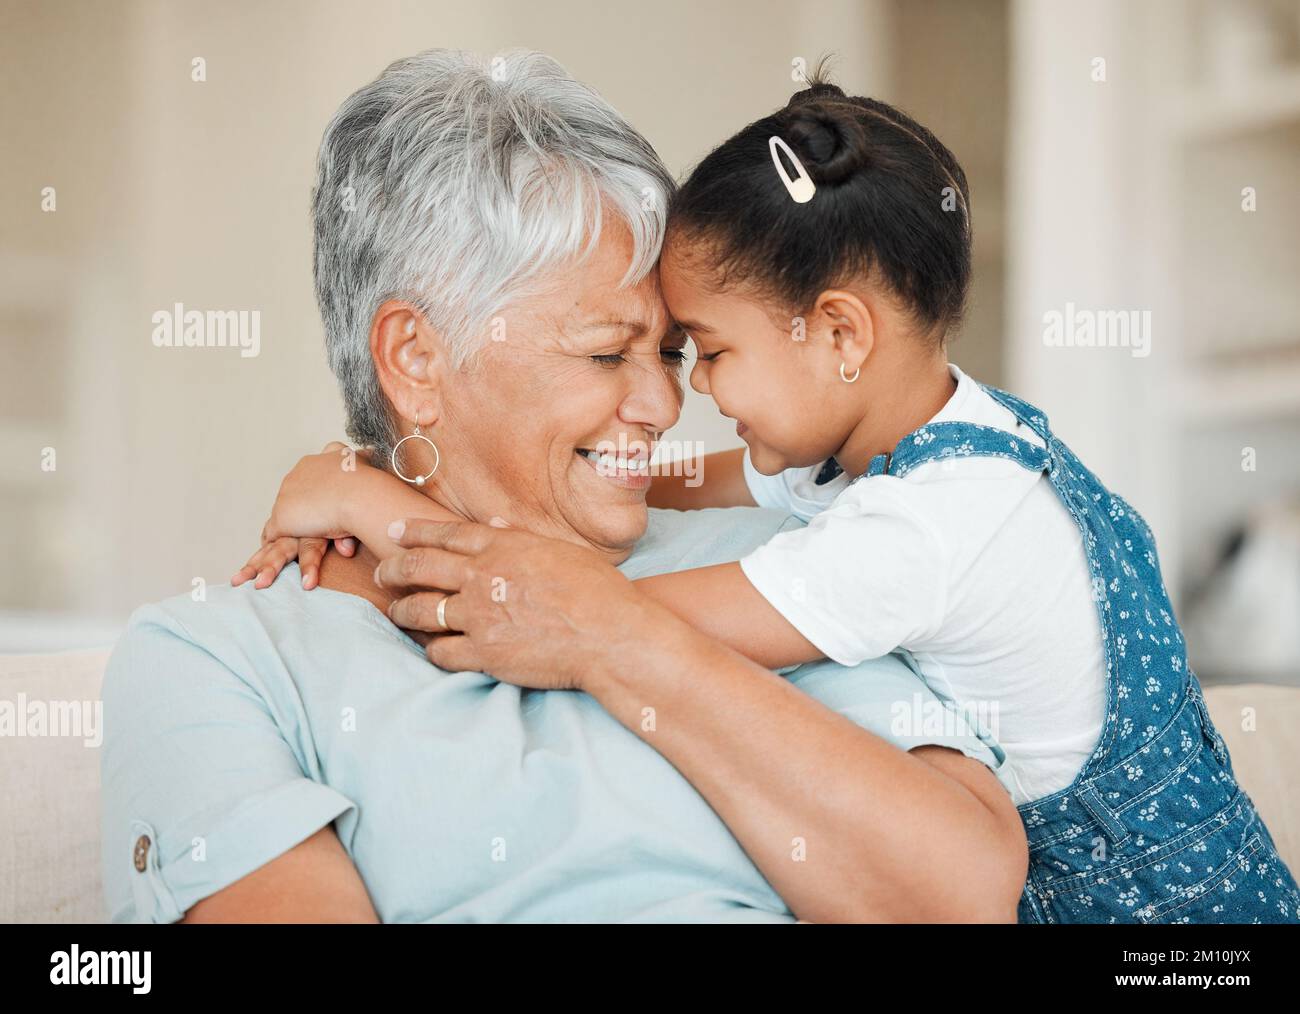 My family is my life. a grandmother and granddaughter bonding on the sofa at home. Stock Photo